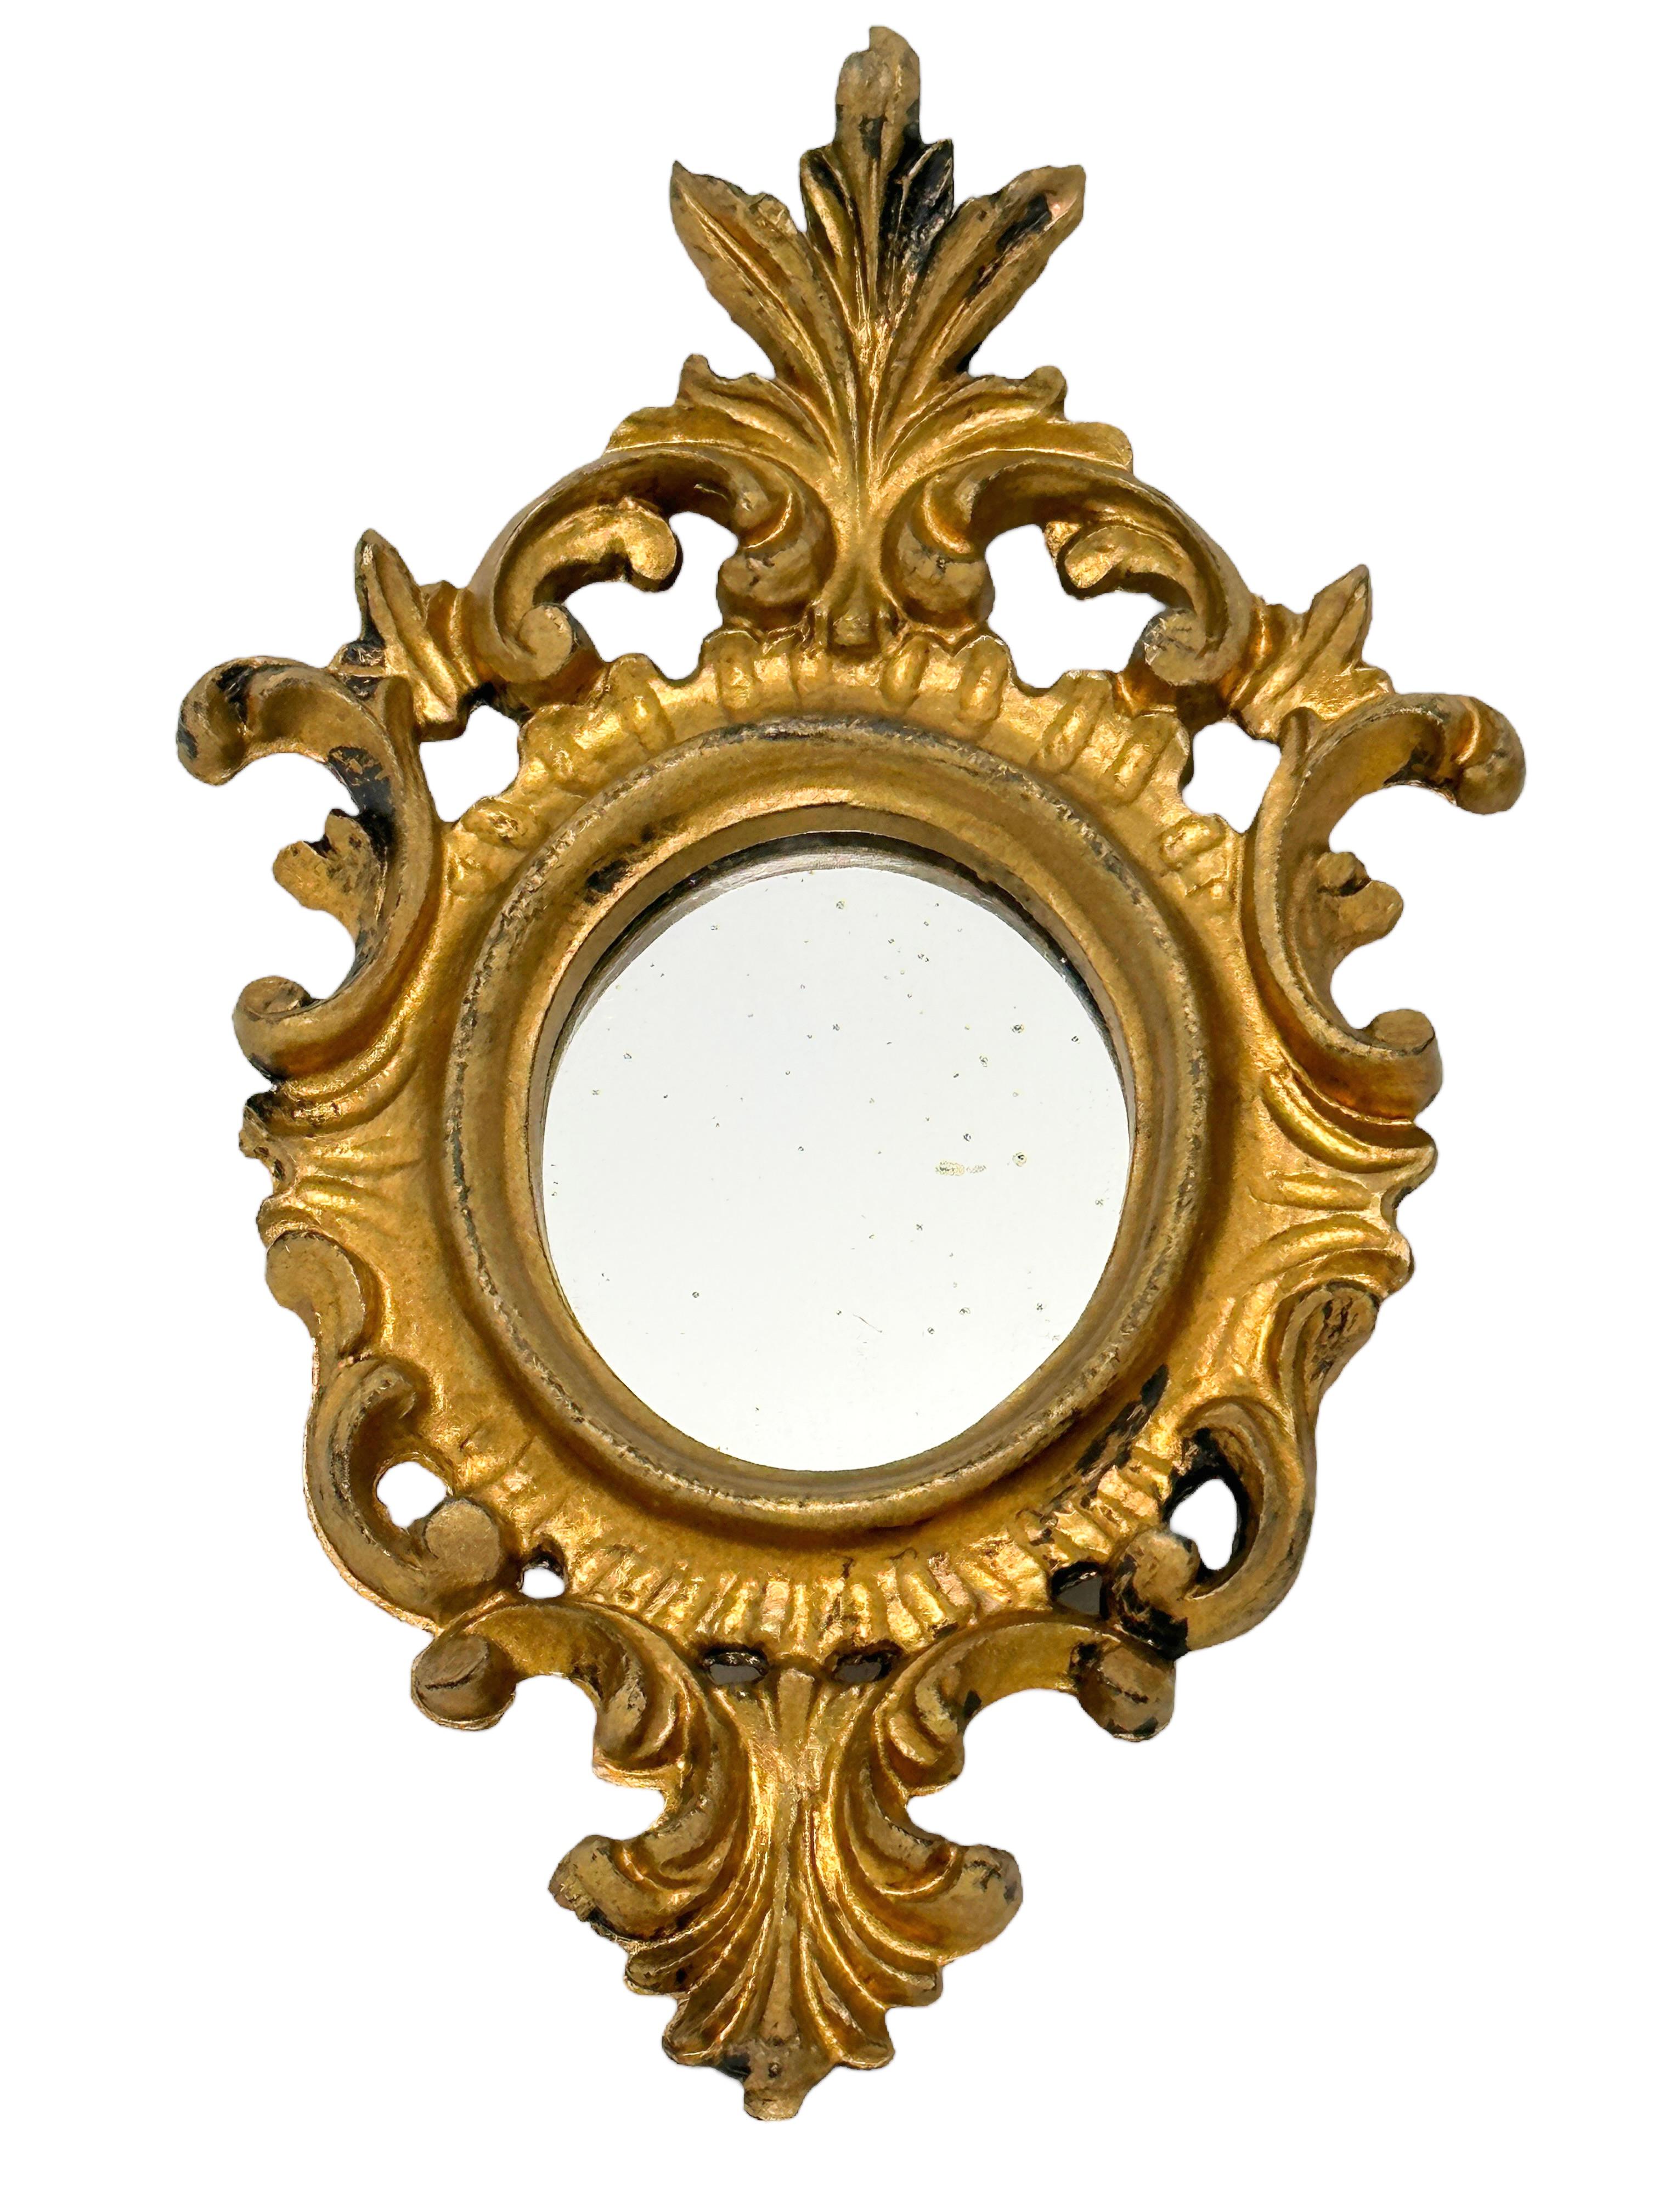 Stunning pair of Hollywood Regency style toleware mirror. The gilt frame surrounds a glass mirror. Made in Italy, circa 1950s. Beautiful small mirrors for any room. Nice addition to any room. marked Italy. viewable Mirror size itself is approx. 2